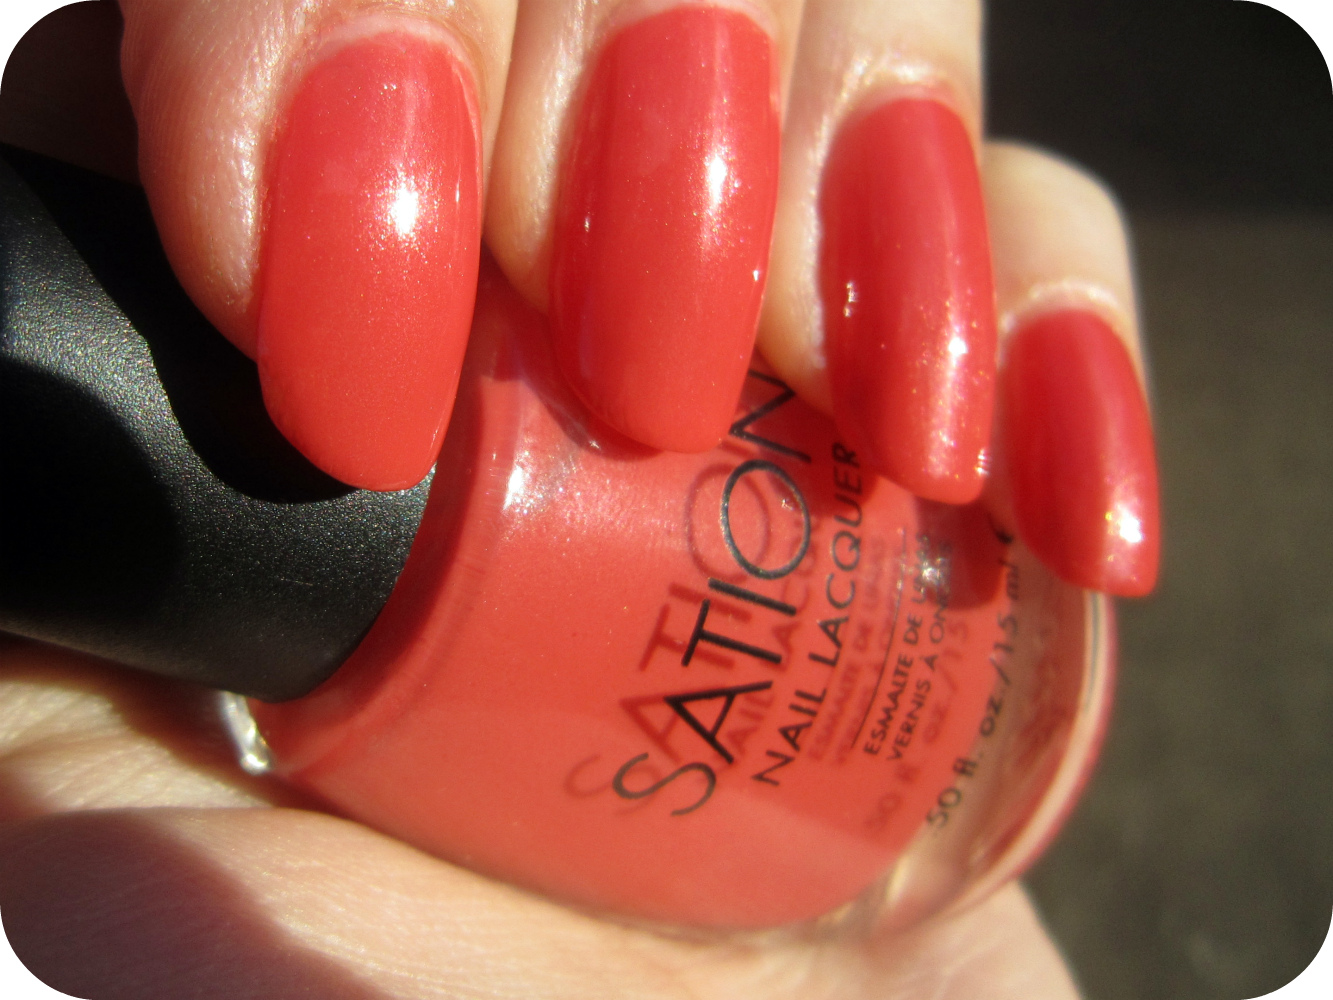 1. Sation Nail Polish in "Color Me Bold" - wide 1